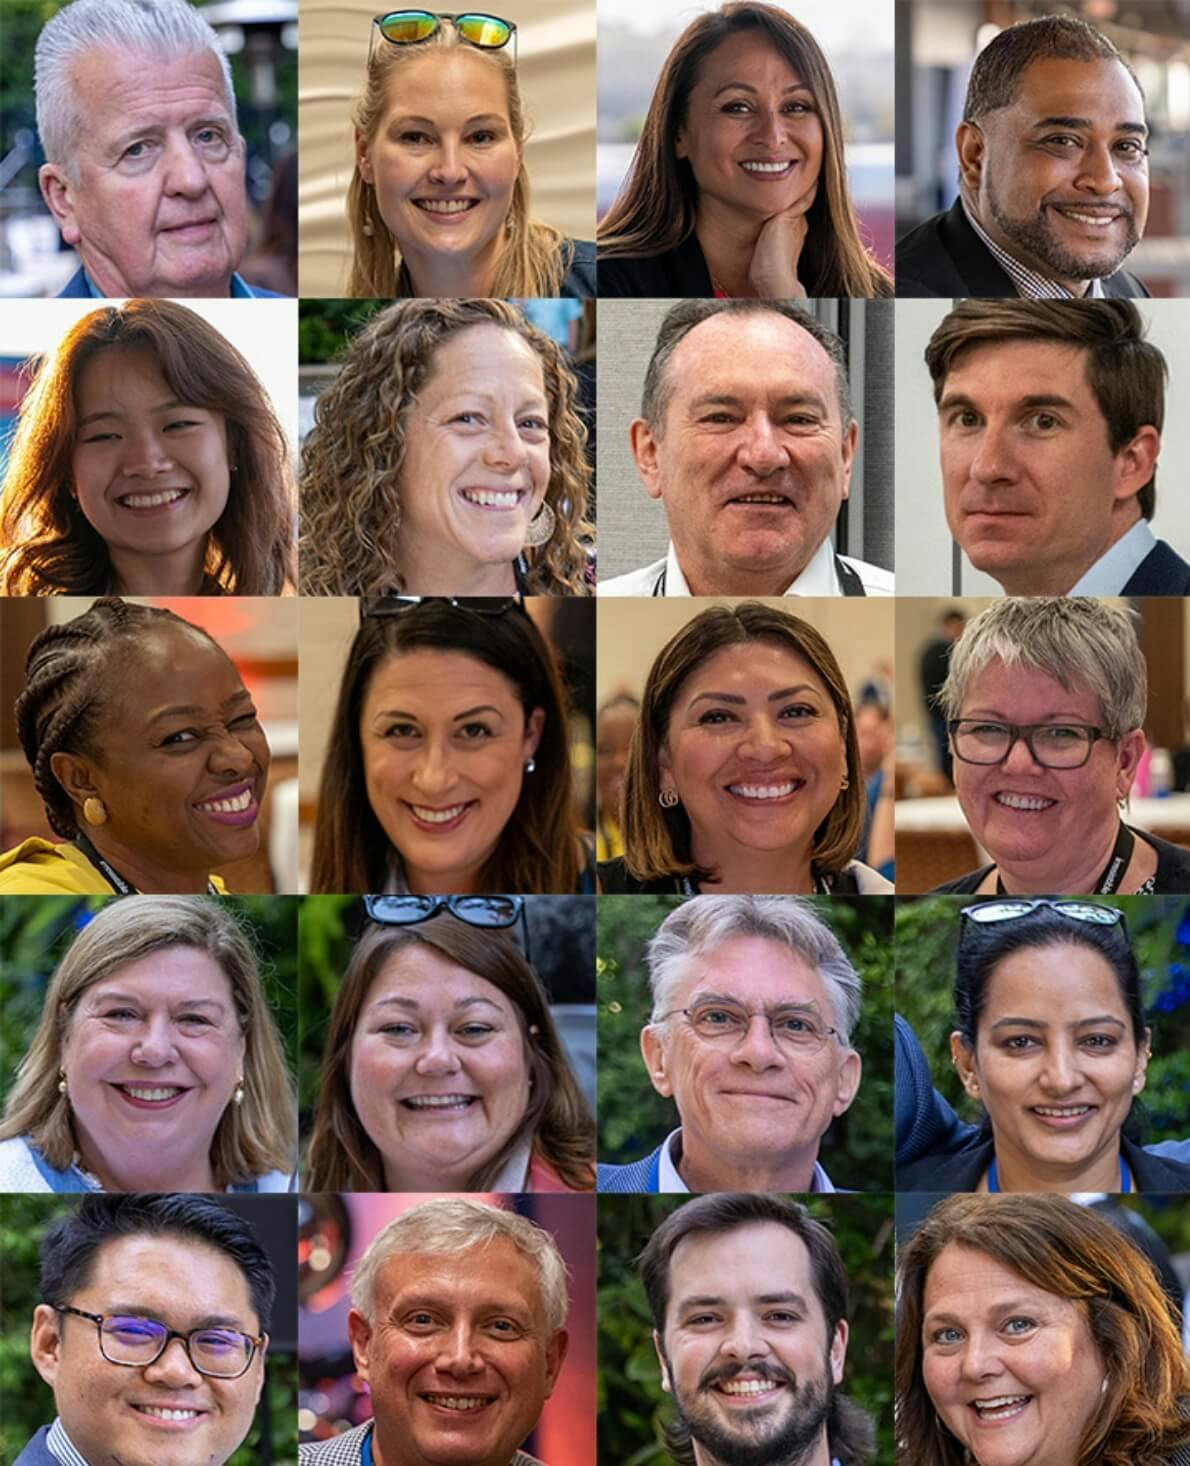 several portraits of smiling people in a grid layout